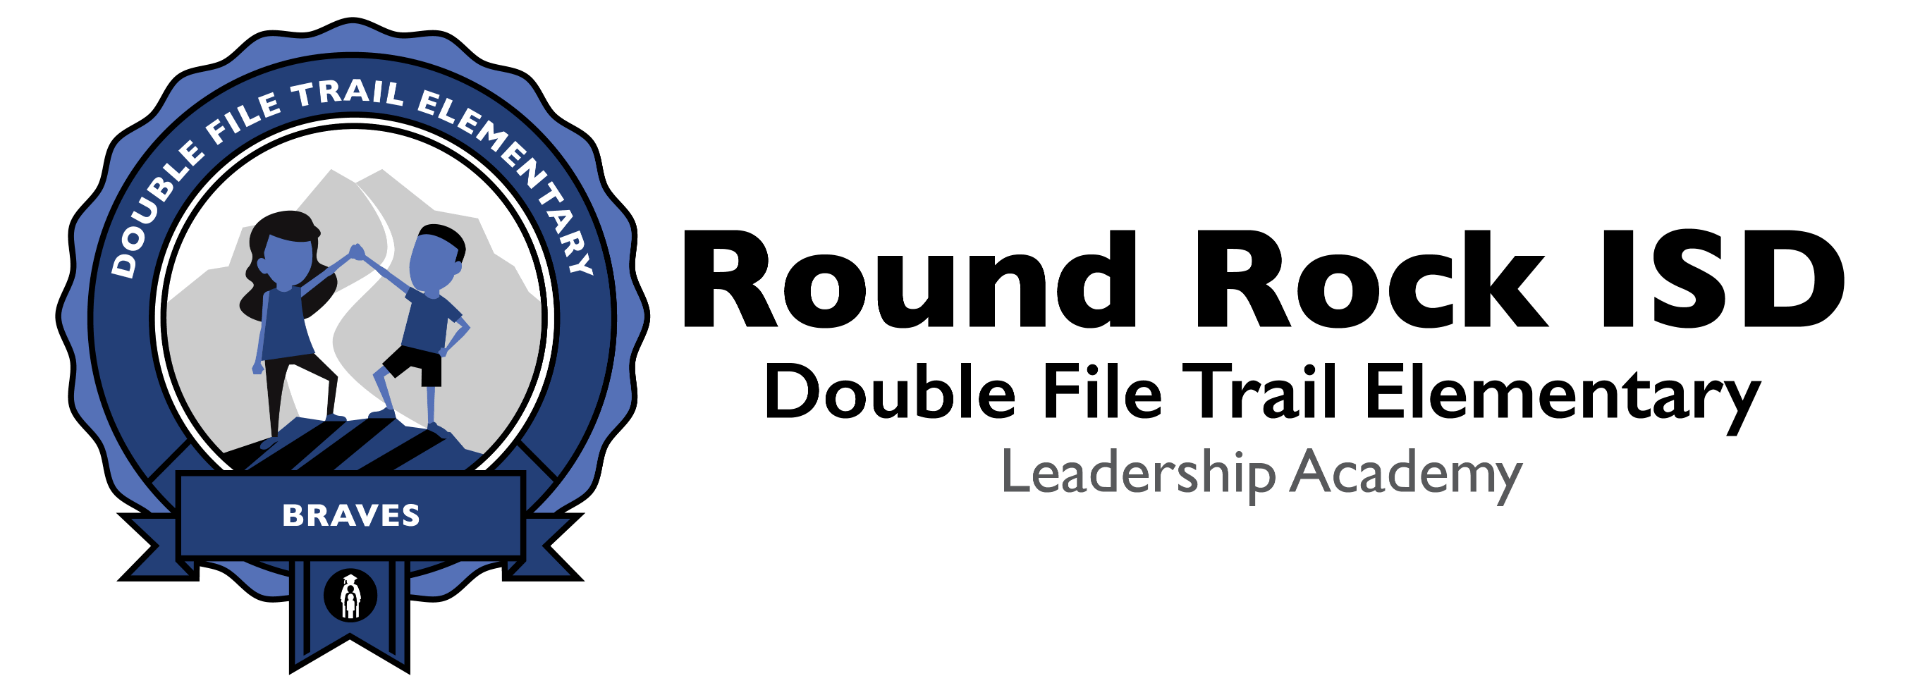 Staff Resources | Double File Trail Elementary School